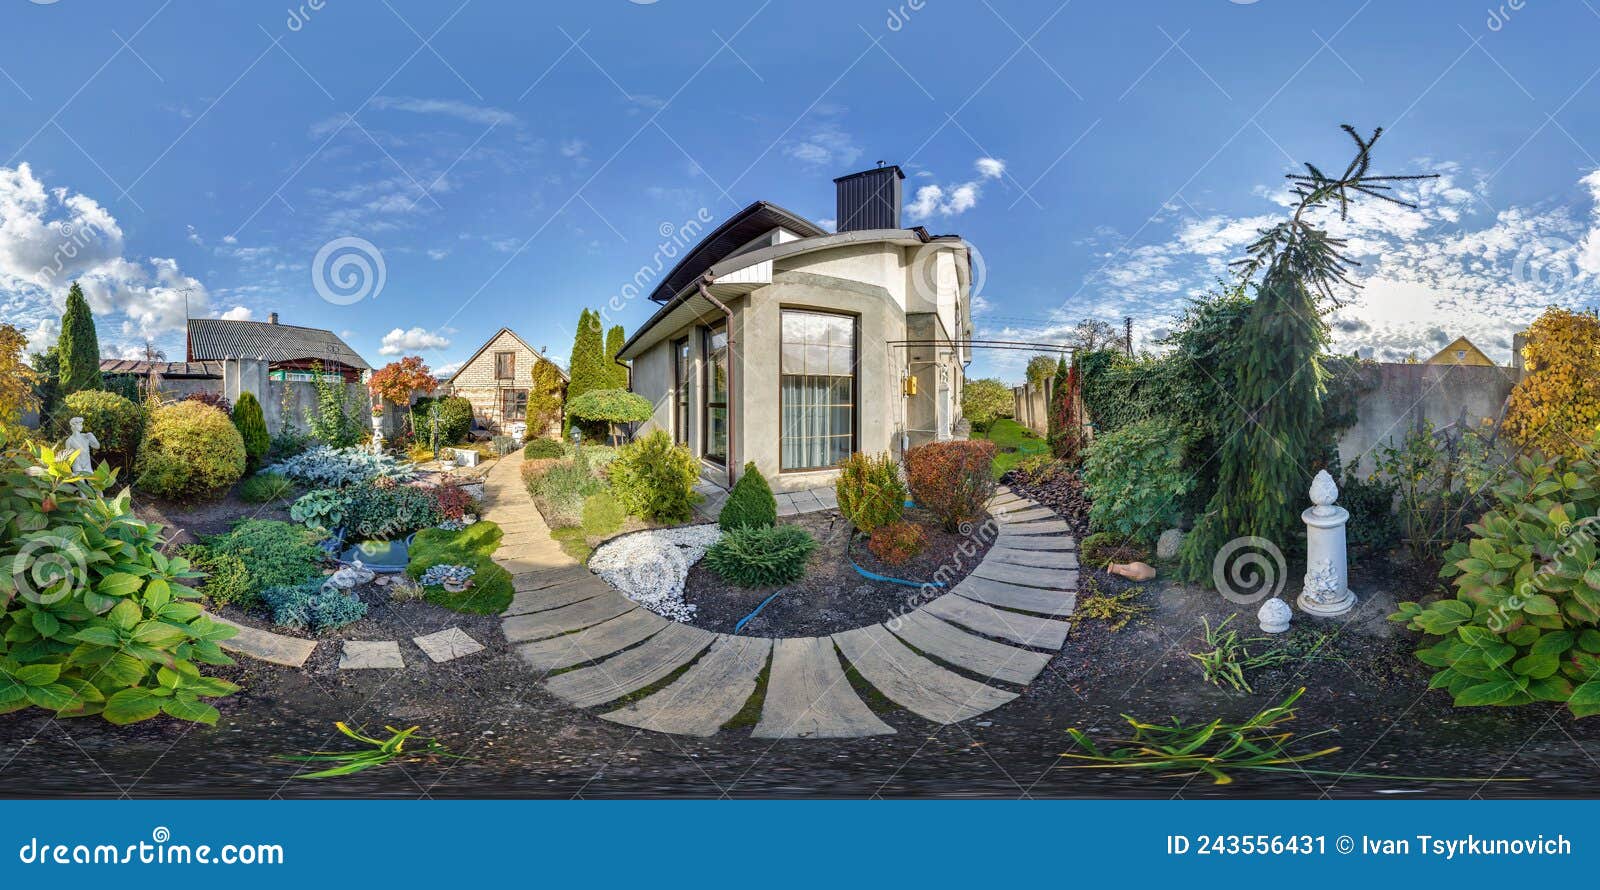 360 hdr panorama on backyard of country house in equirectangular seamless spherical projection, vr content